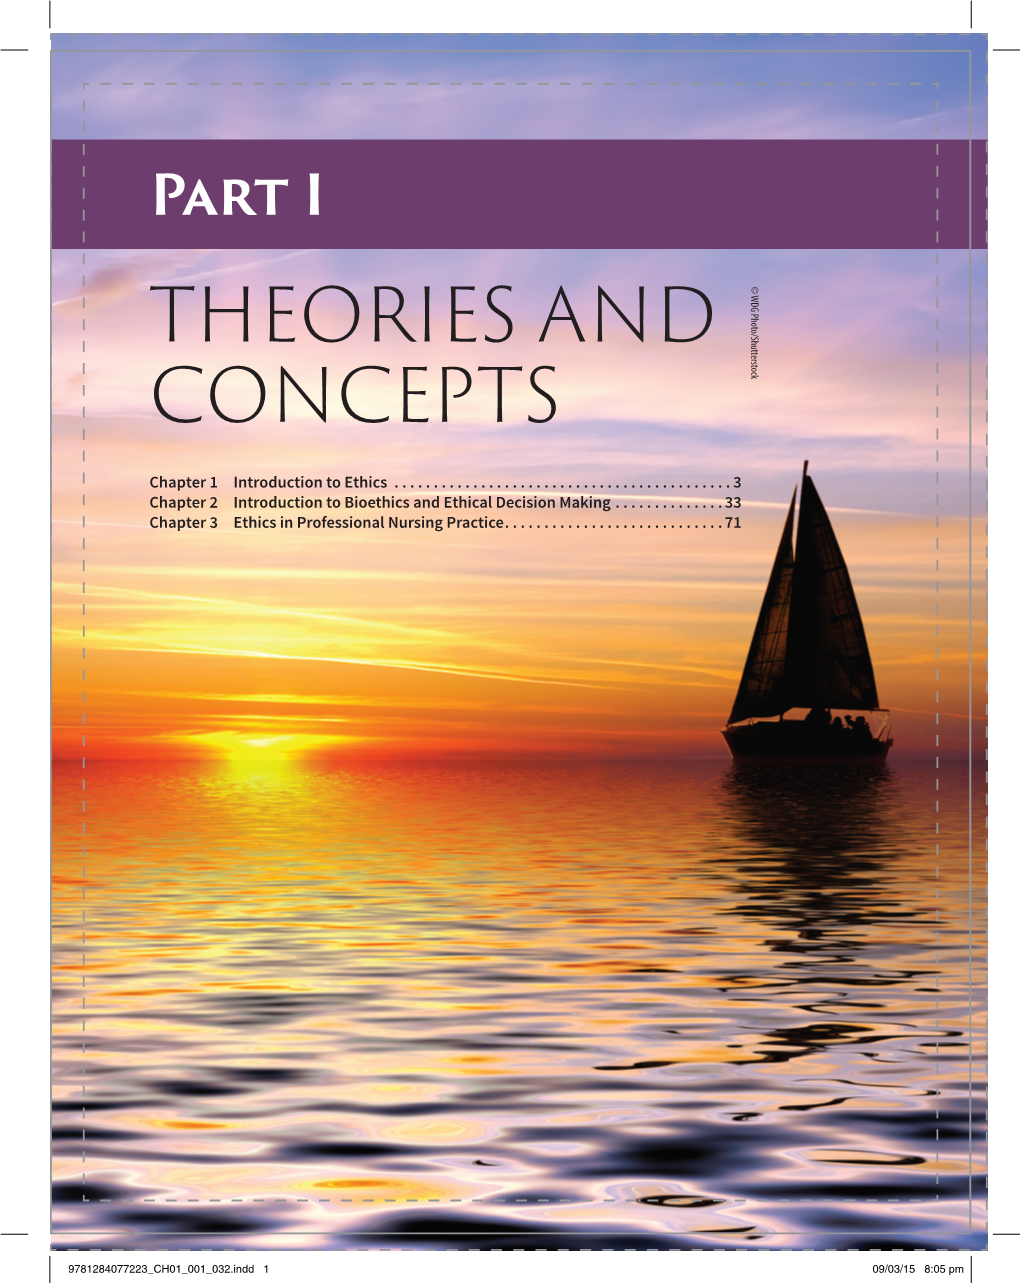 Theories and Concepts